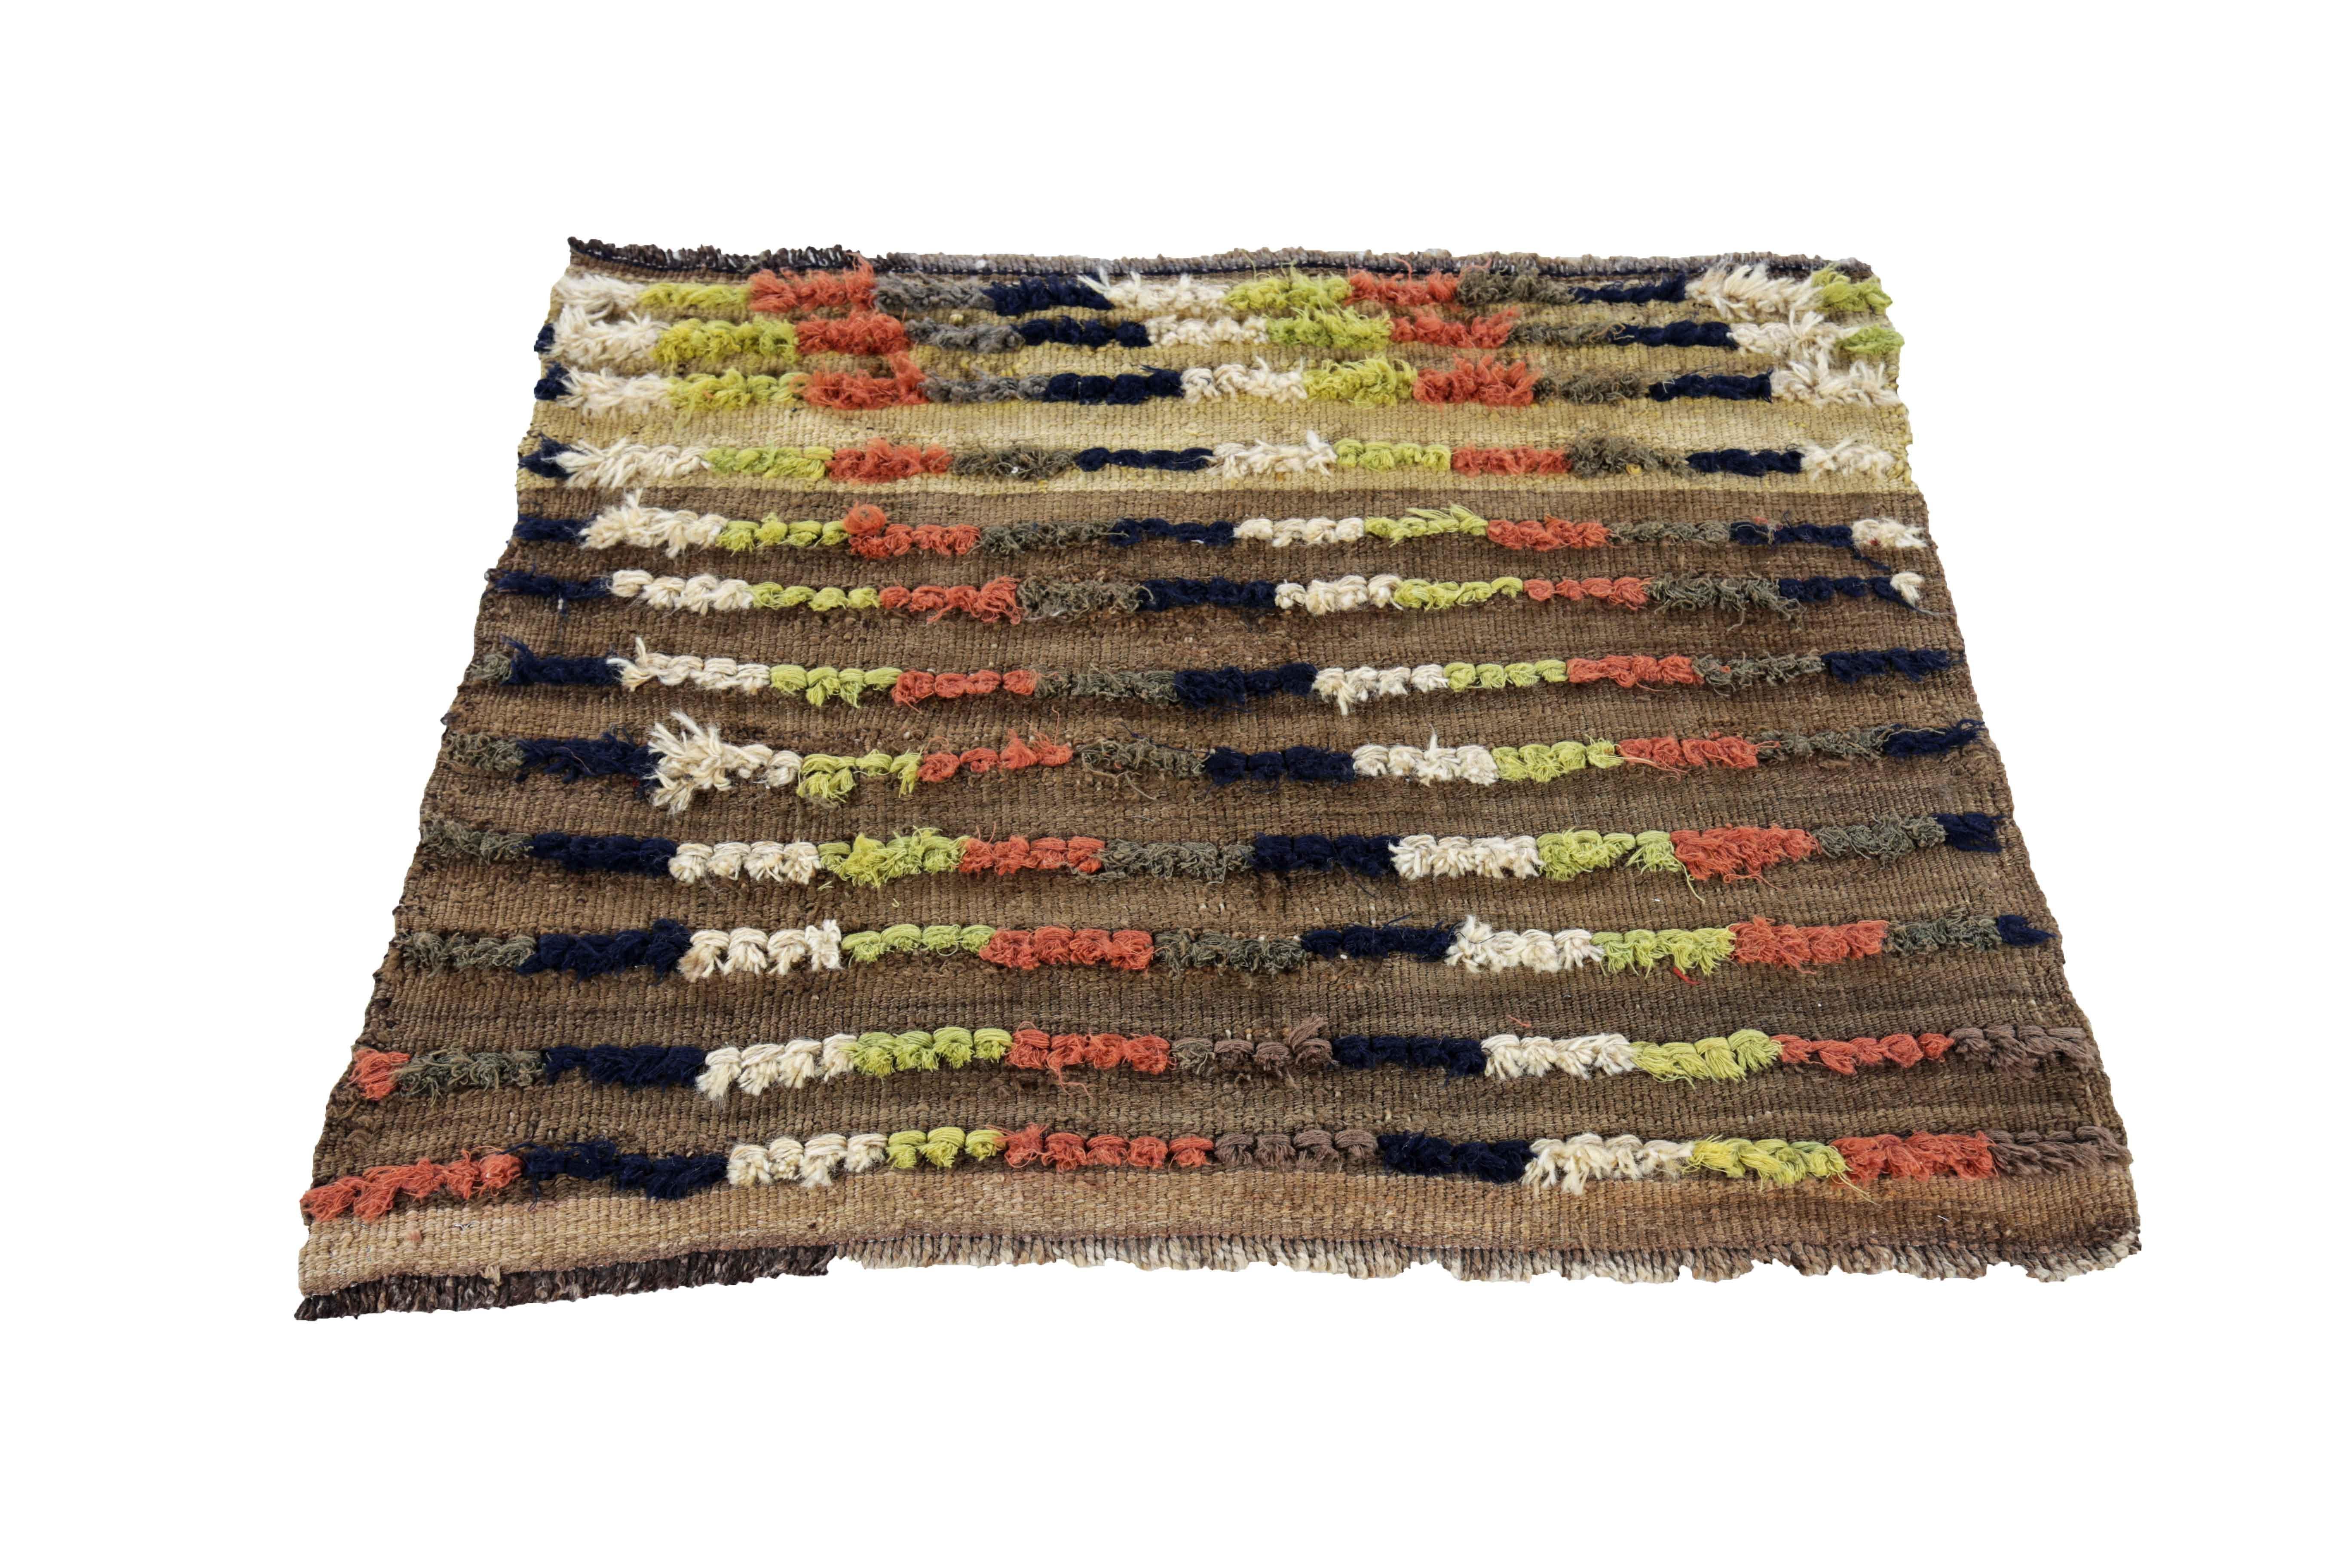 Antique Persian square rug handwoven from the finest sheep’s wool. It’s colored with all-natural vegetable dyes that are safe for humans and pets. It’s a traditional Gabbeh design handwoven by expert artisans. It’s a lovely square rug that can be